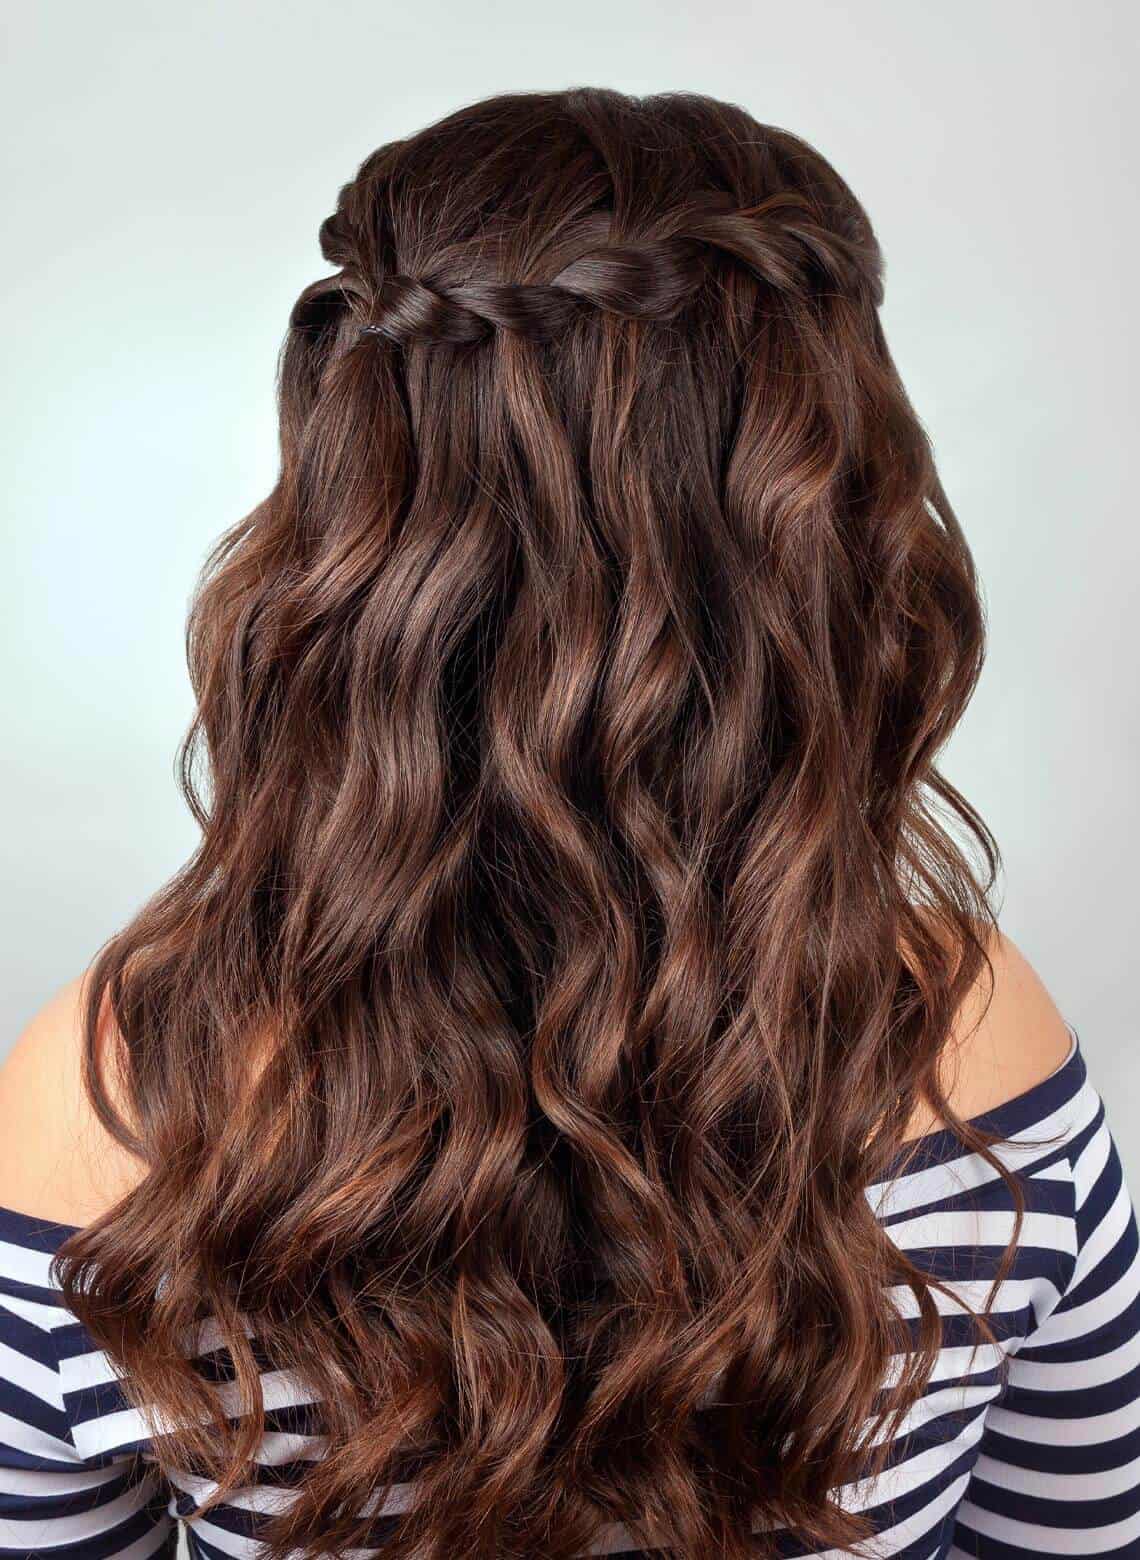 42 Formal Hairstyles for Long Hair You Can Try - StyleSeat